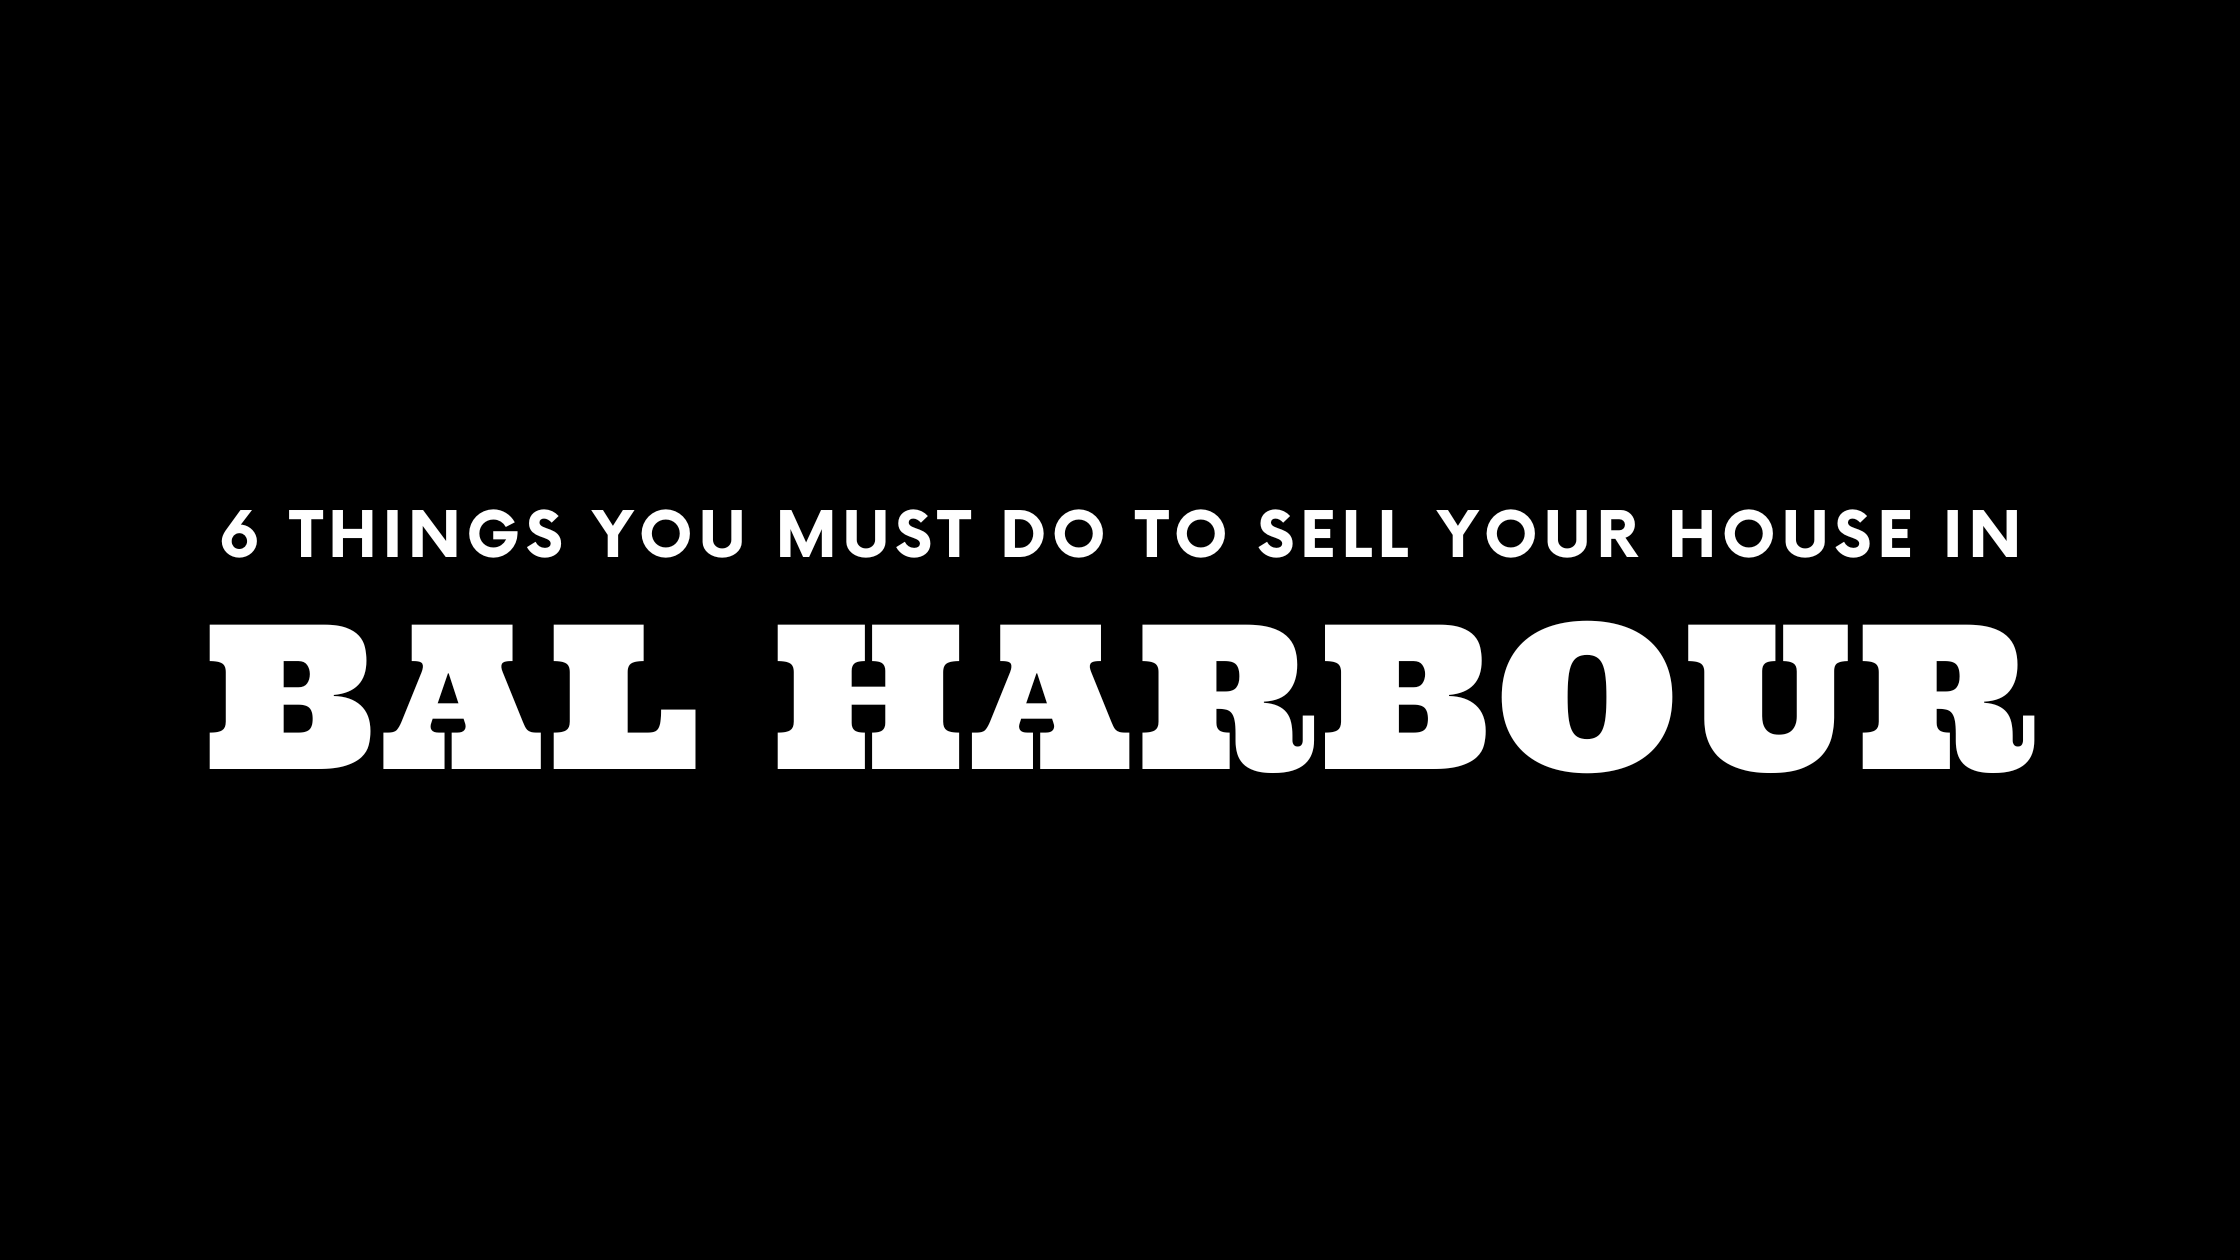 Selling Your House in Bal Harbour? 6 Things You MUST Do!